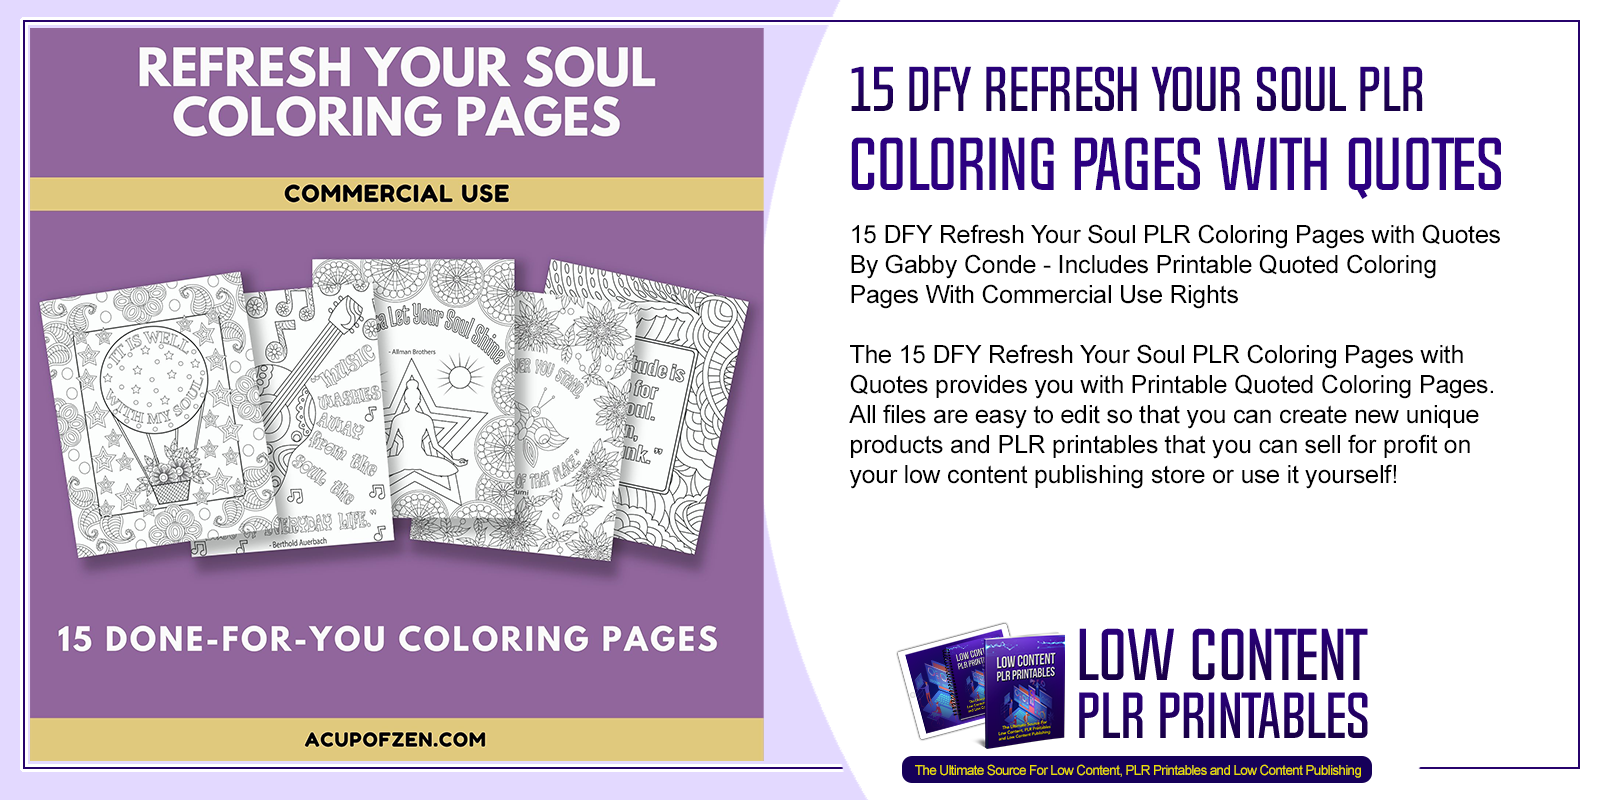 15 DFY Refresh Your Soul PLR Coloring Pages with Quotes